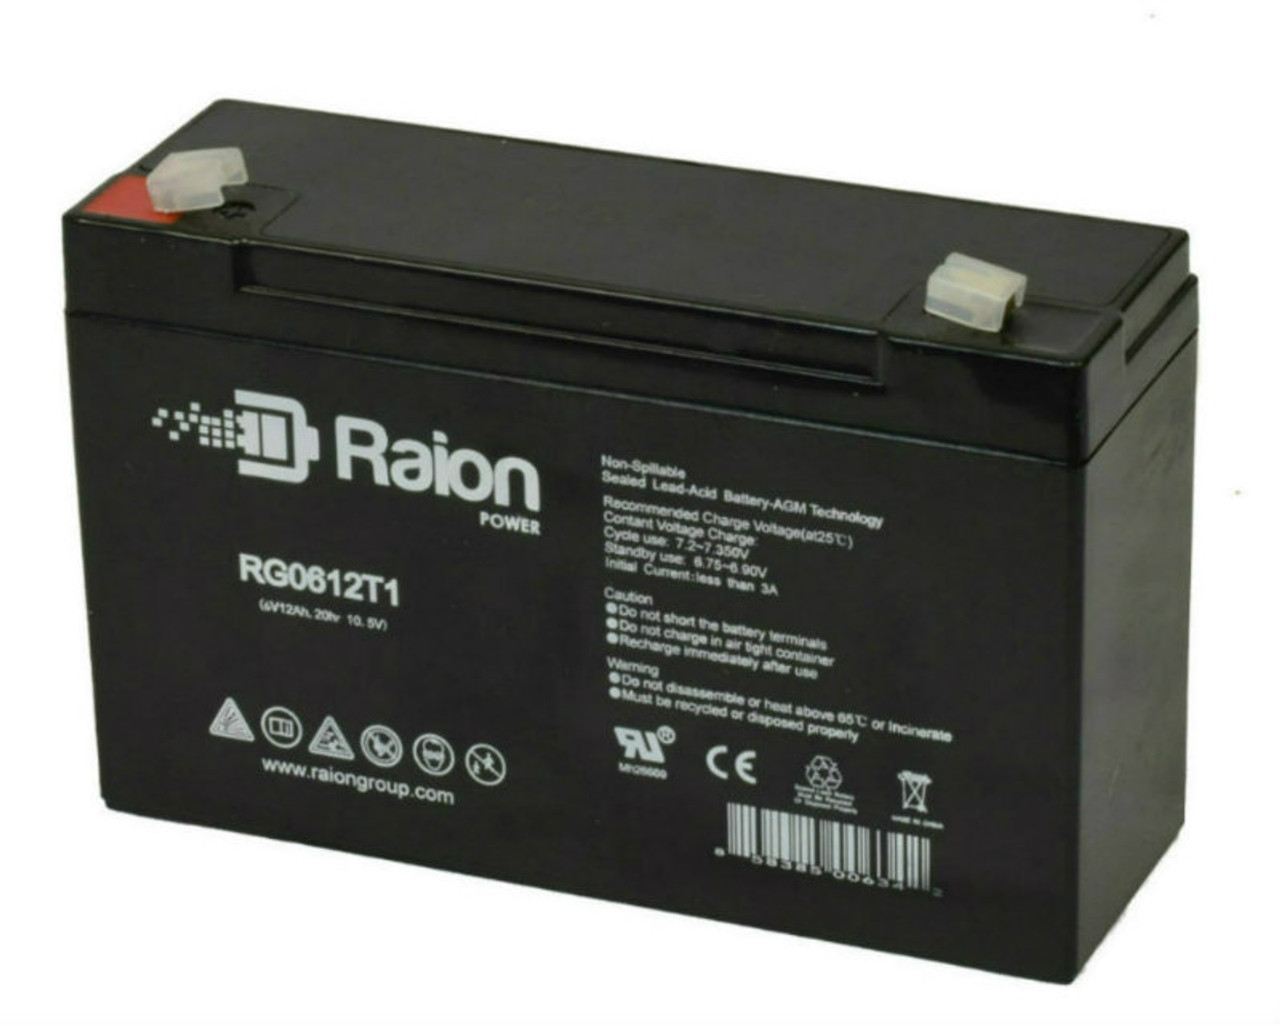 Raion Power RG06120T1 Replacement Battery for Kweight Power KW 6-12